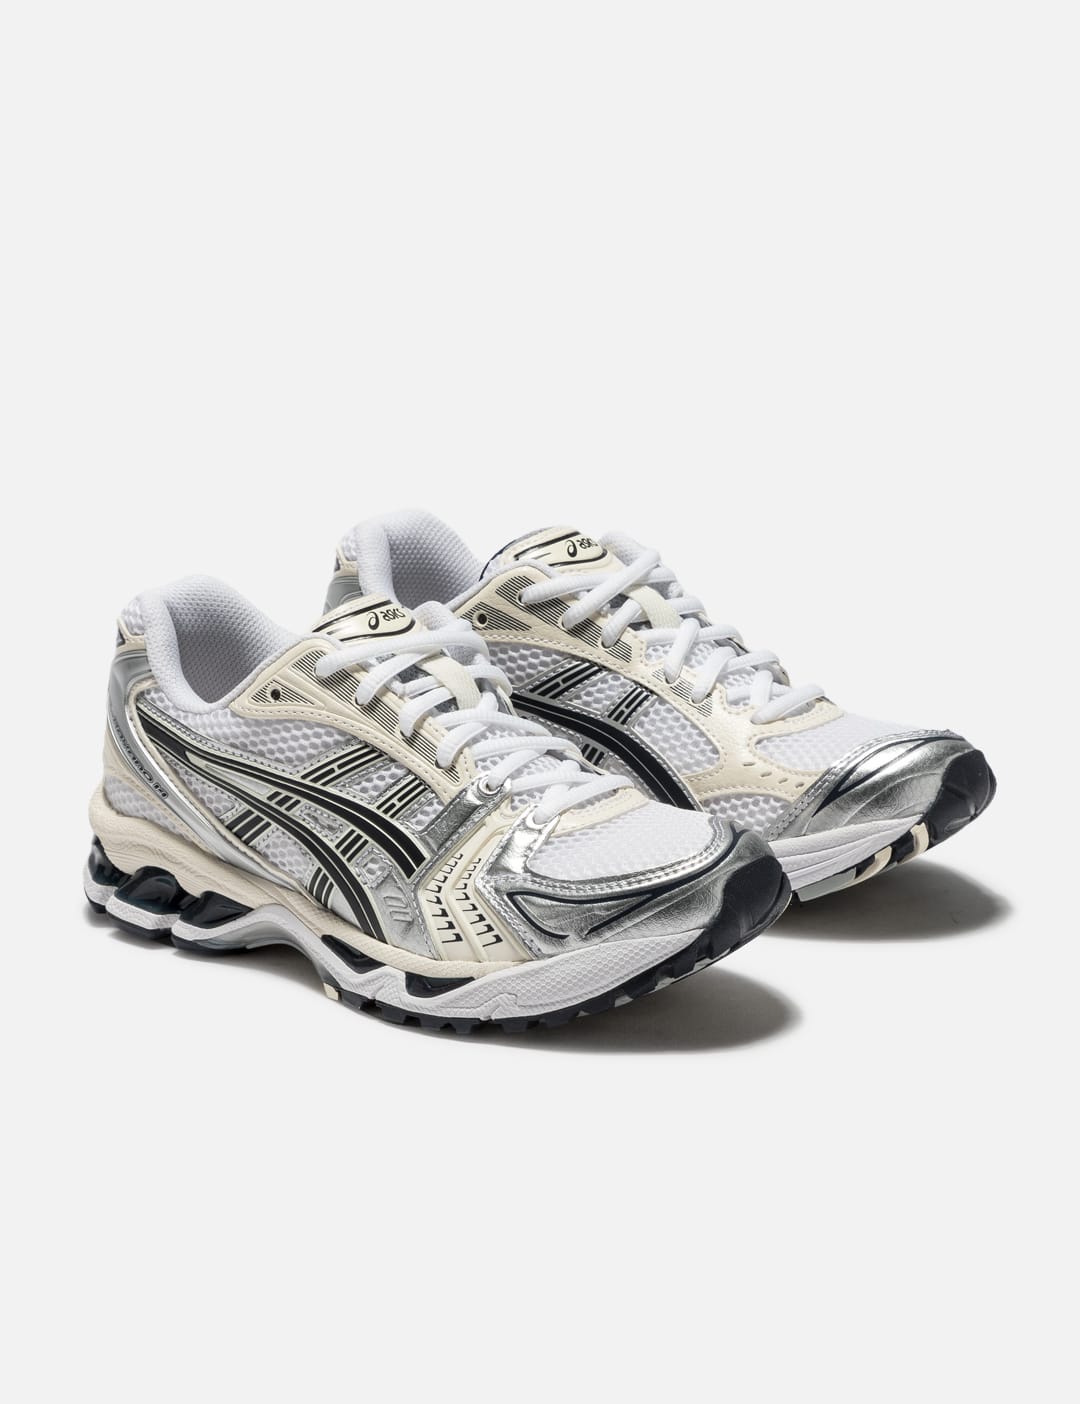 Asics - GEL-KAYANO 14 | HBX - Globally Curated Fashion and